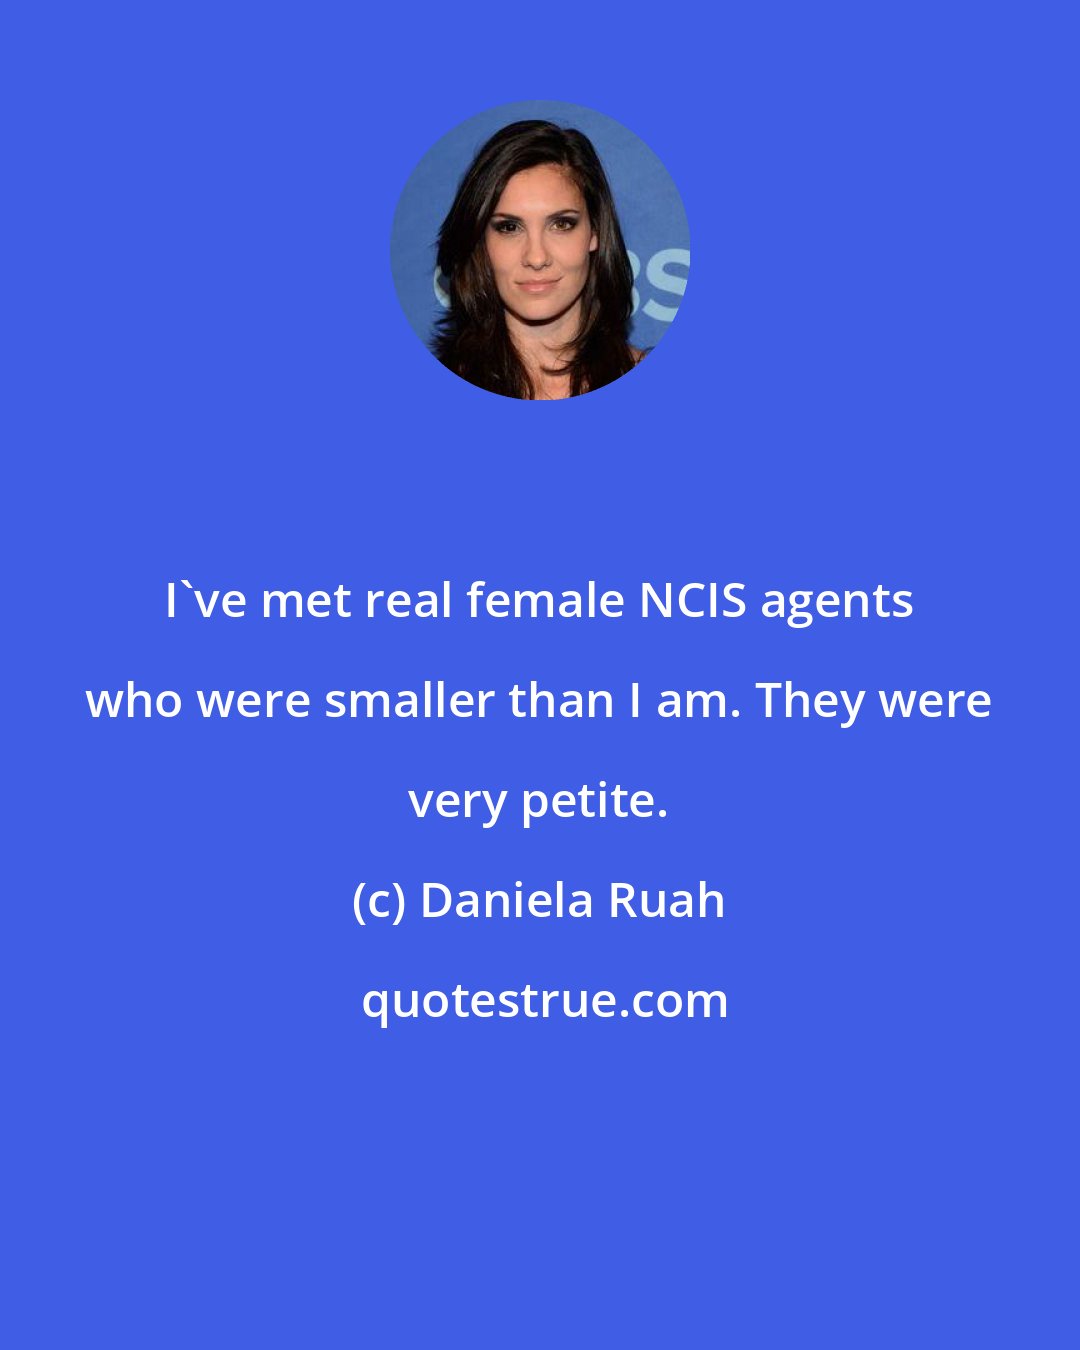 Daniela Ruah: I've met real female NCIS agents who were smaller than I am. They were very petite.